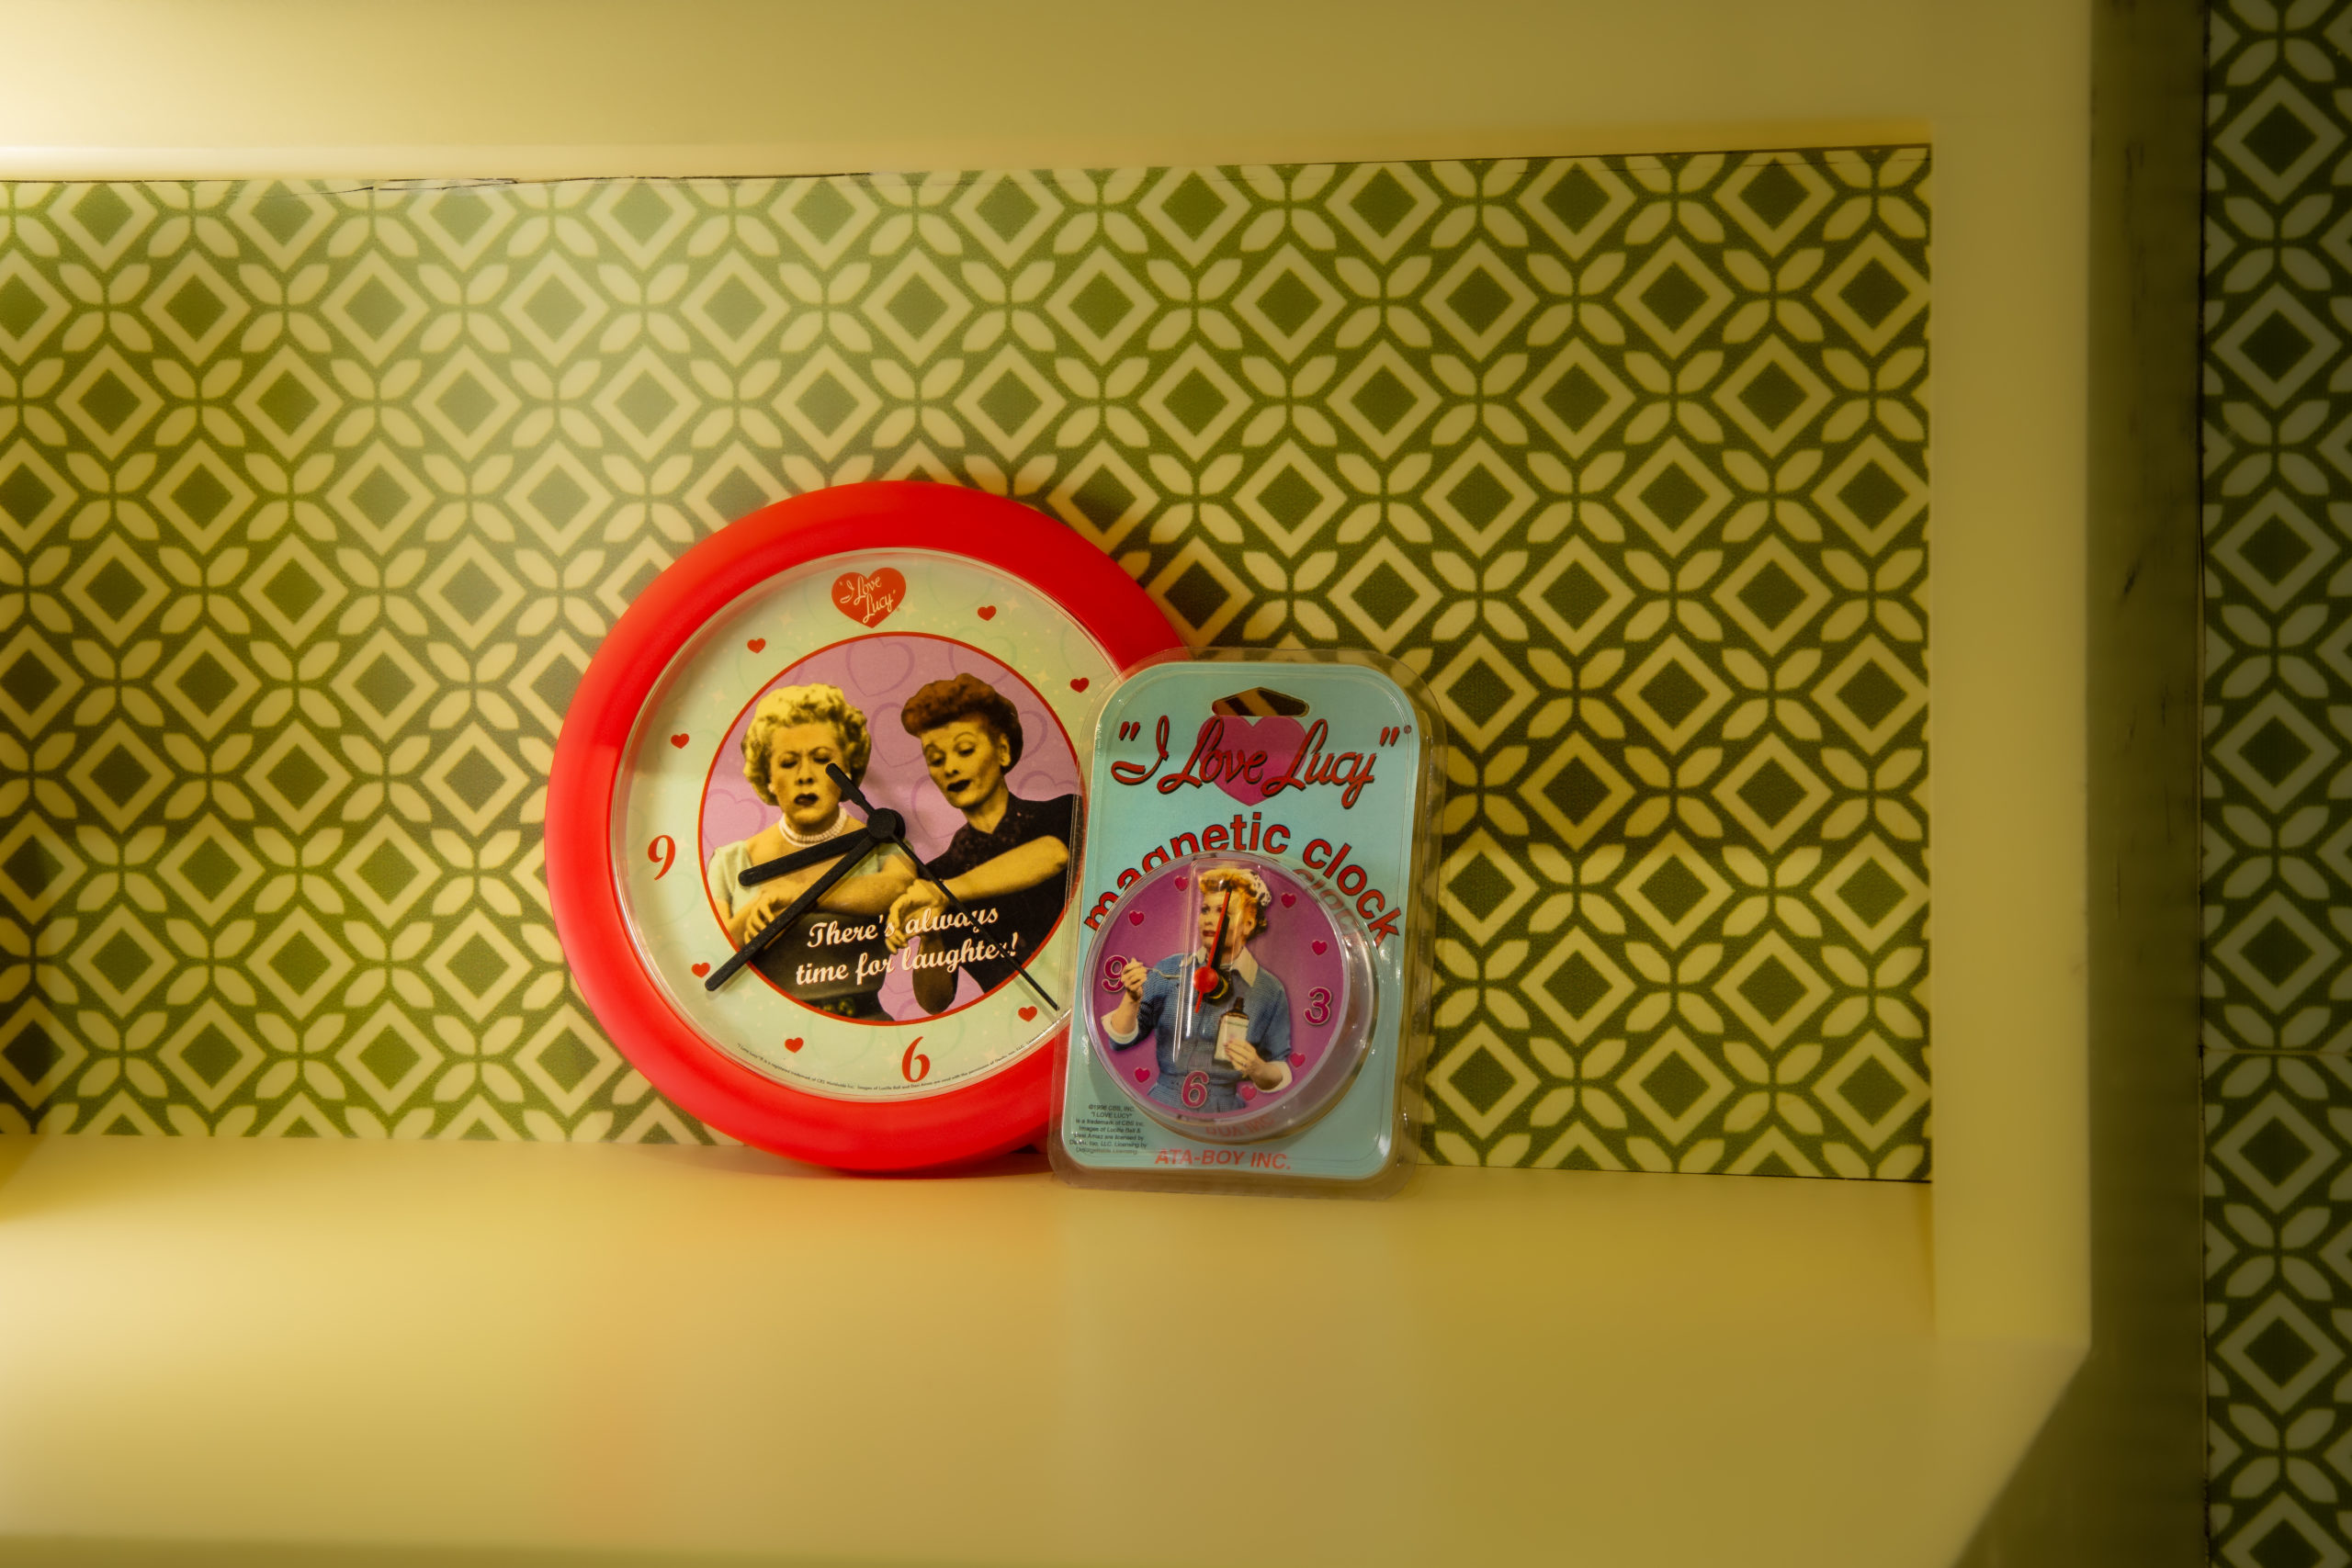 Two I Love Lucy themed clocks on display in front of vintage wallpaper